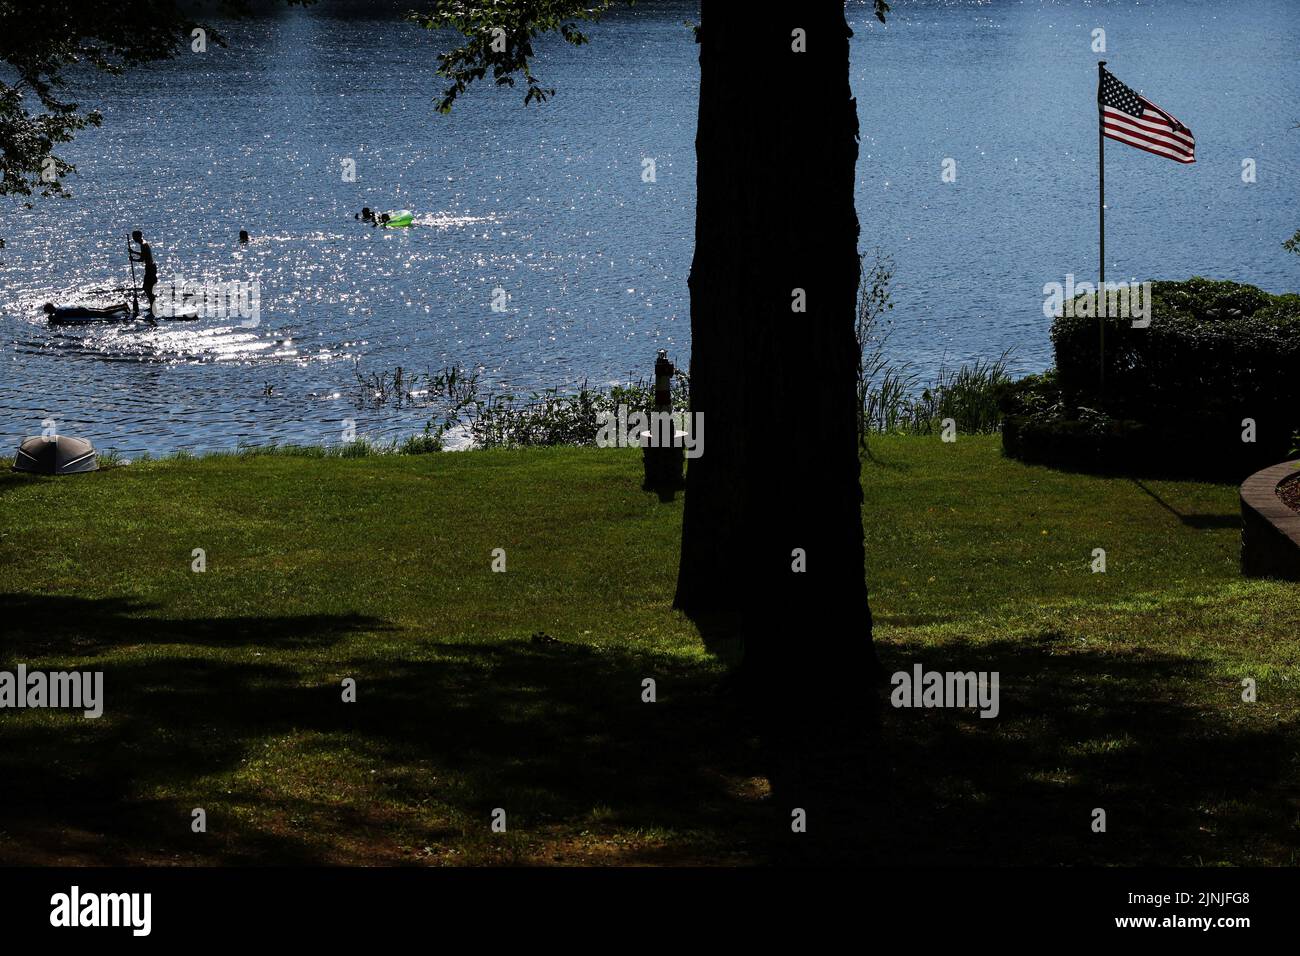 Kids swim and paddle in Schroon Lake in the Adirondack Park, during hotter than normal temperatures, in Schroon, New York, U.S., July 20, 2022. REUTERS/Shannon Stapleton Stock Photo